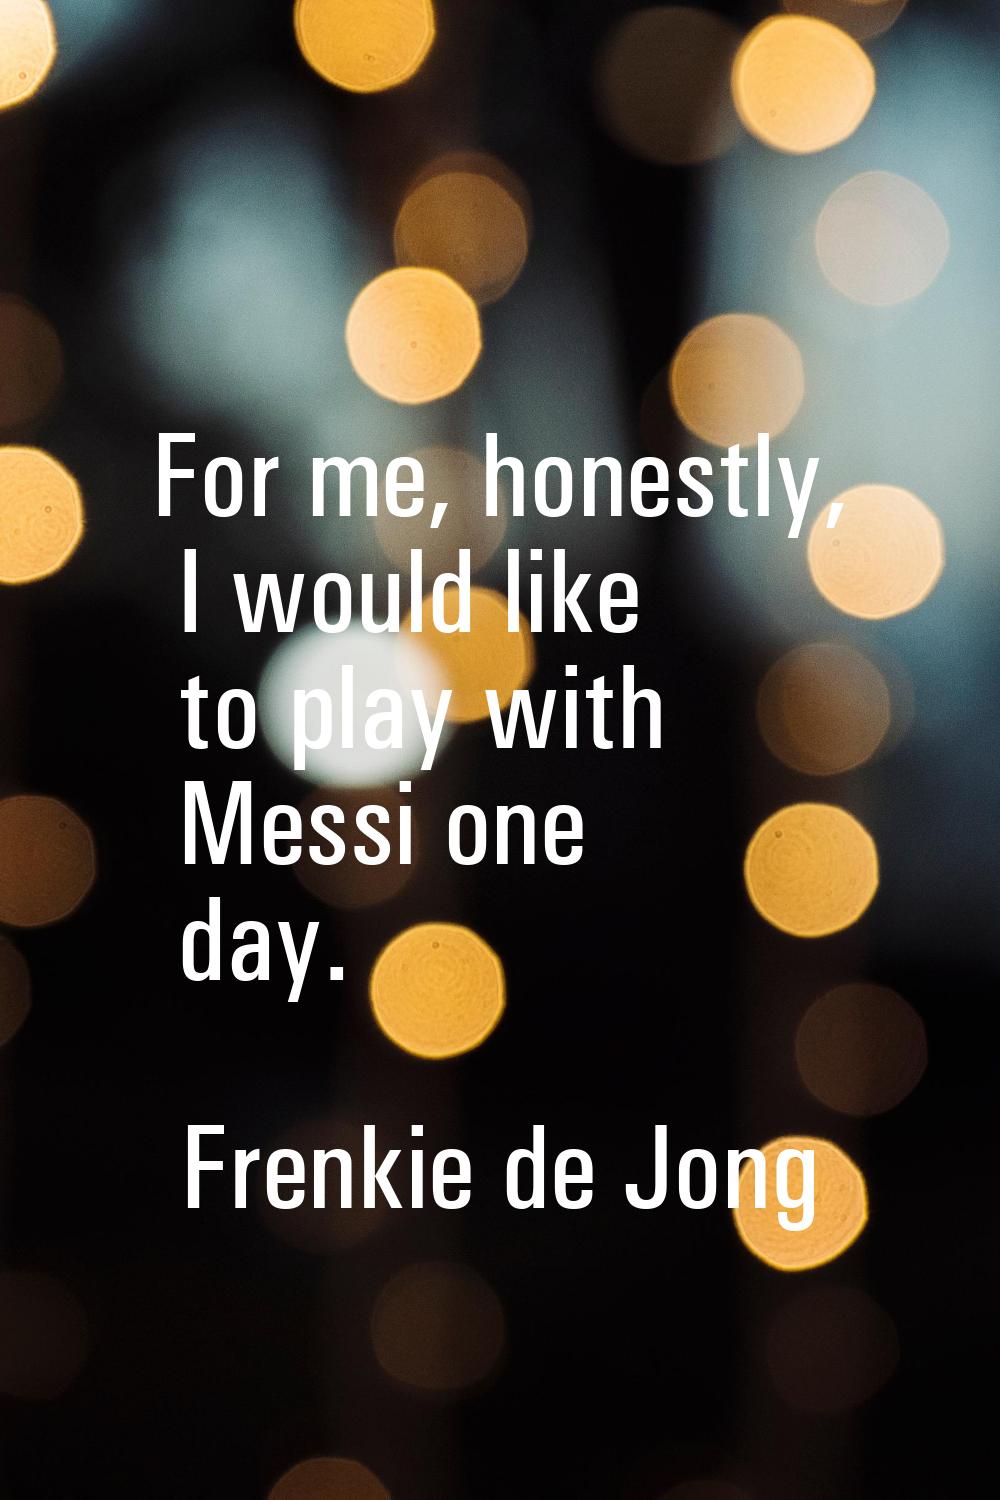 For me, honestly, I would like to play with Messi one day.